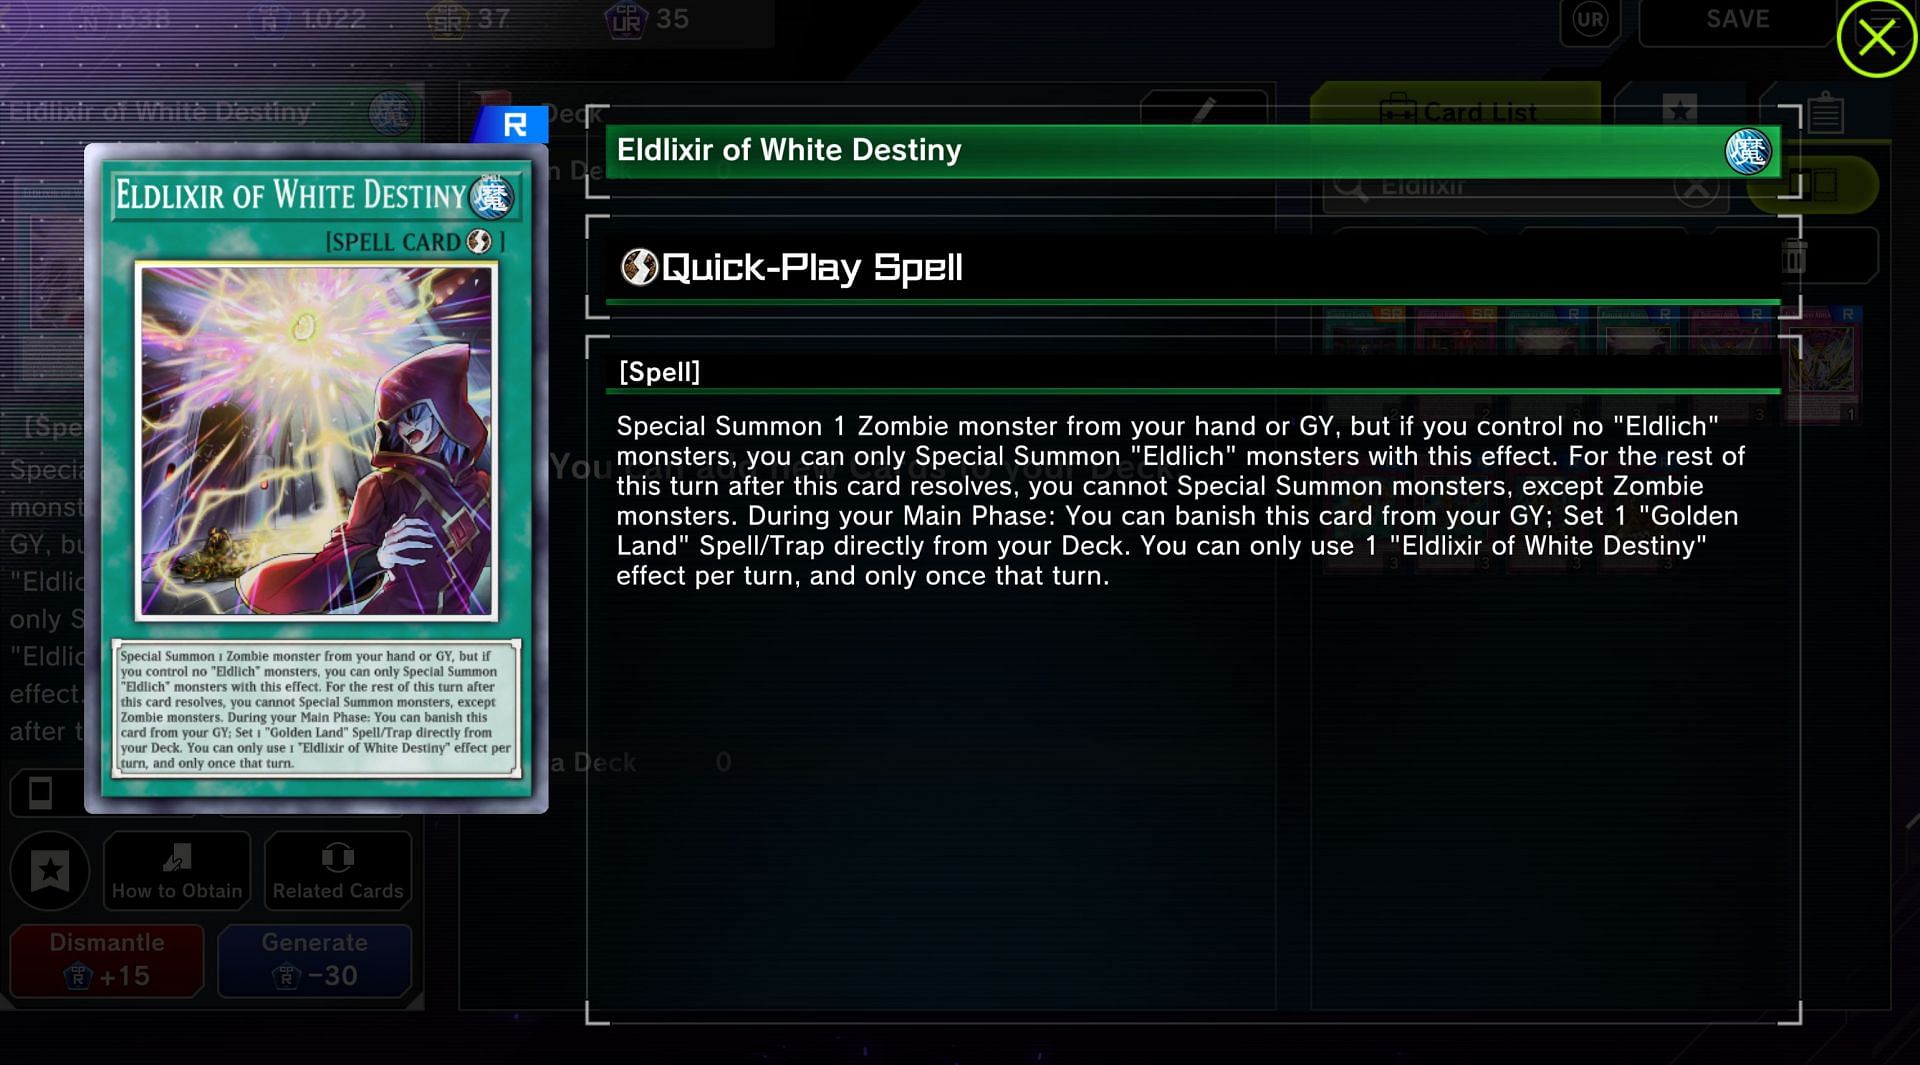 Another key component of the deck are the Eldlixirs (Image via Konami)